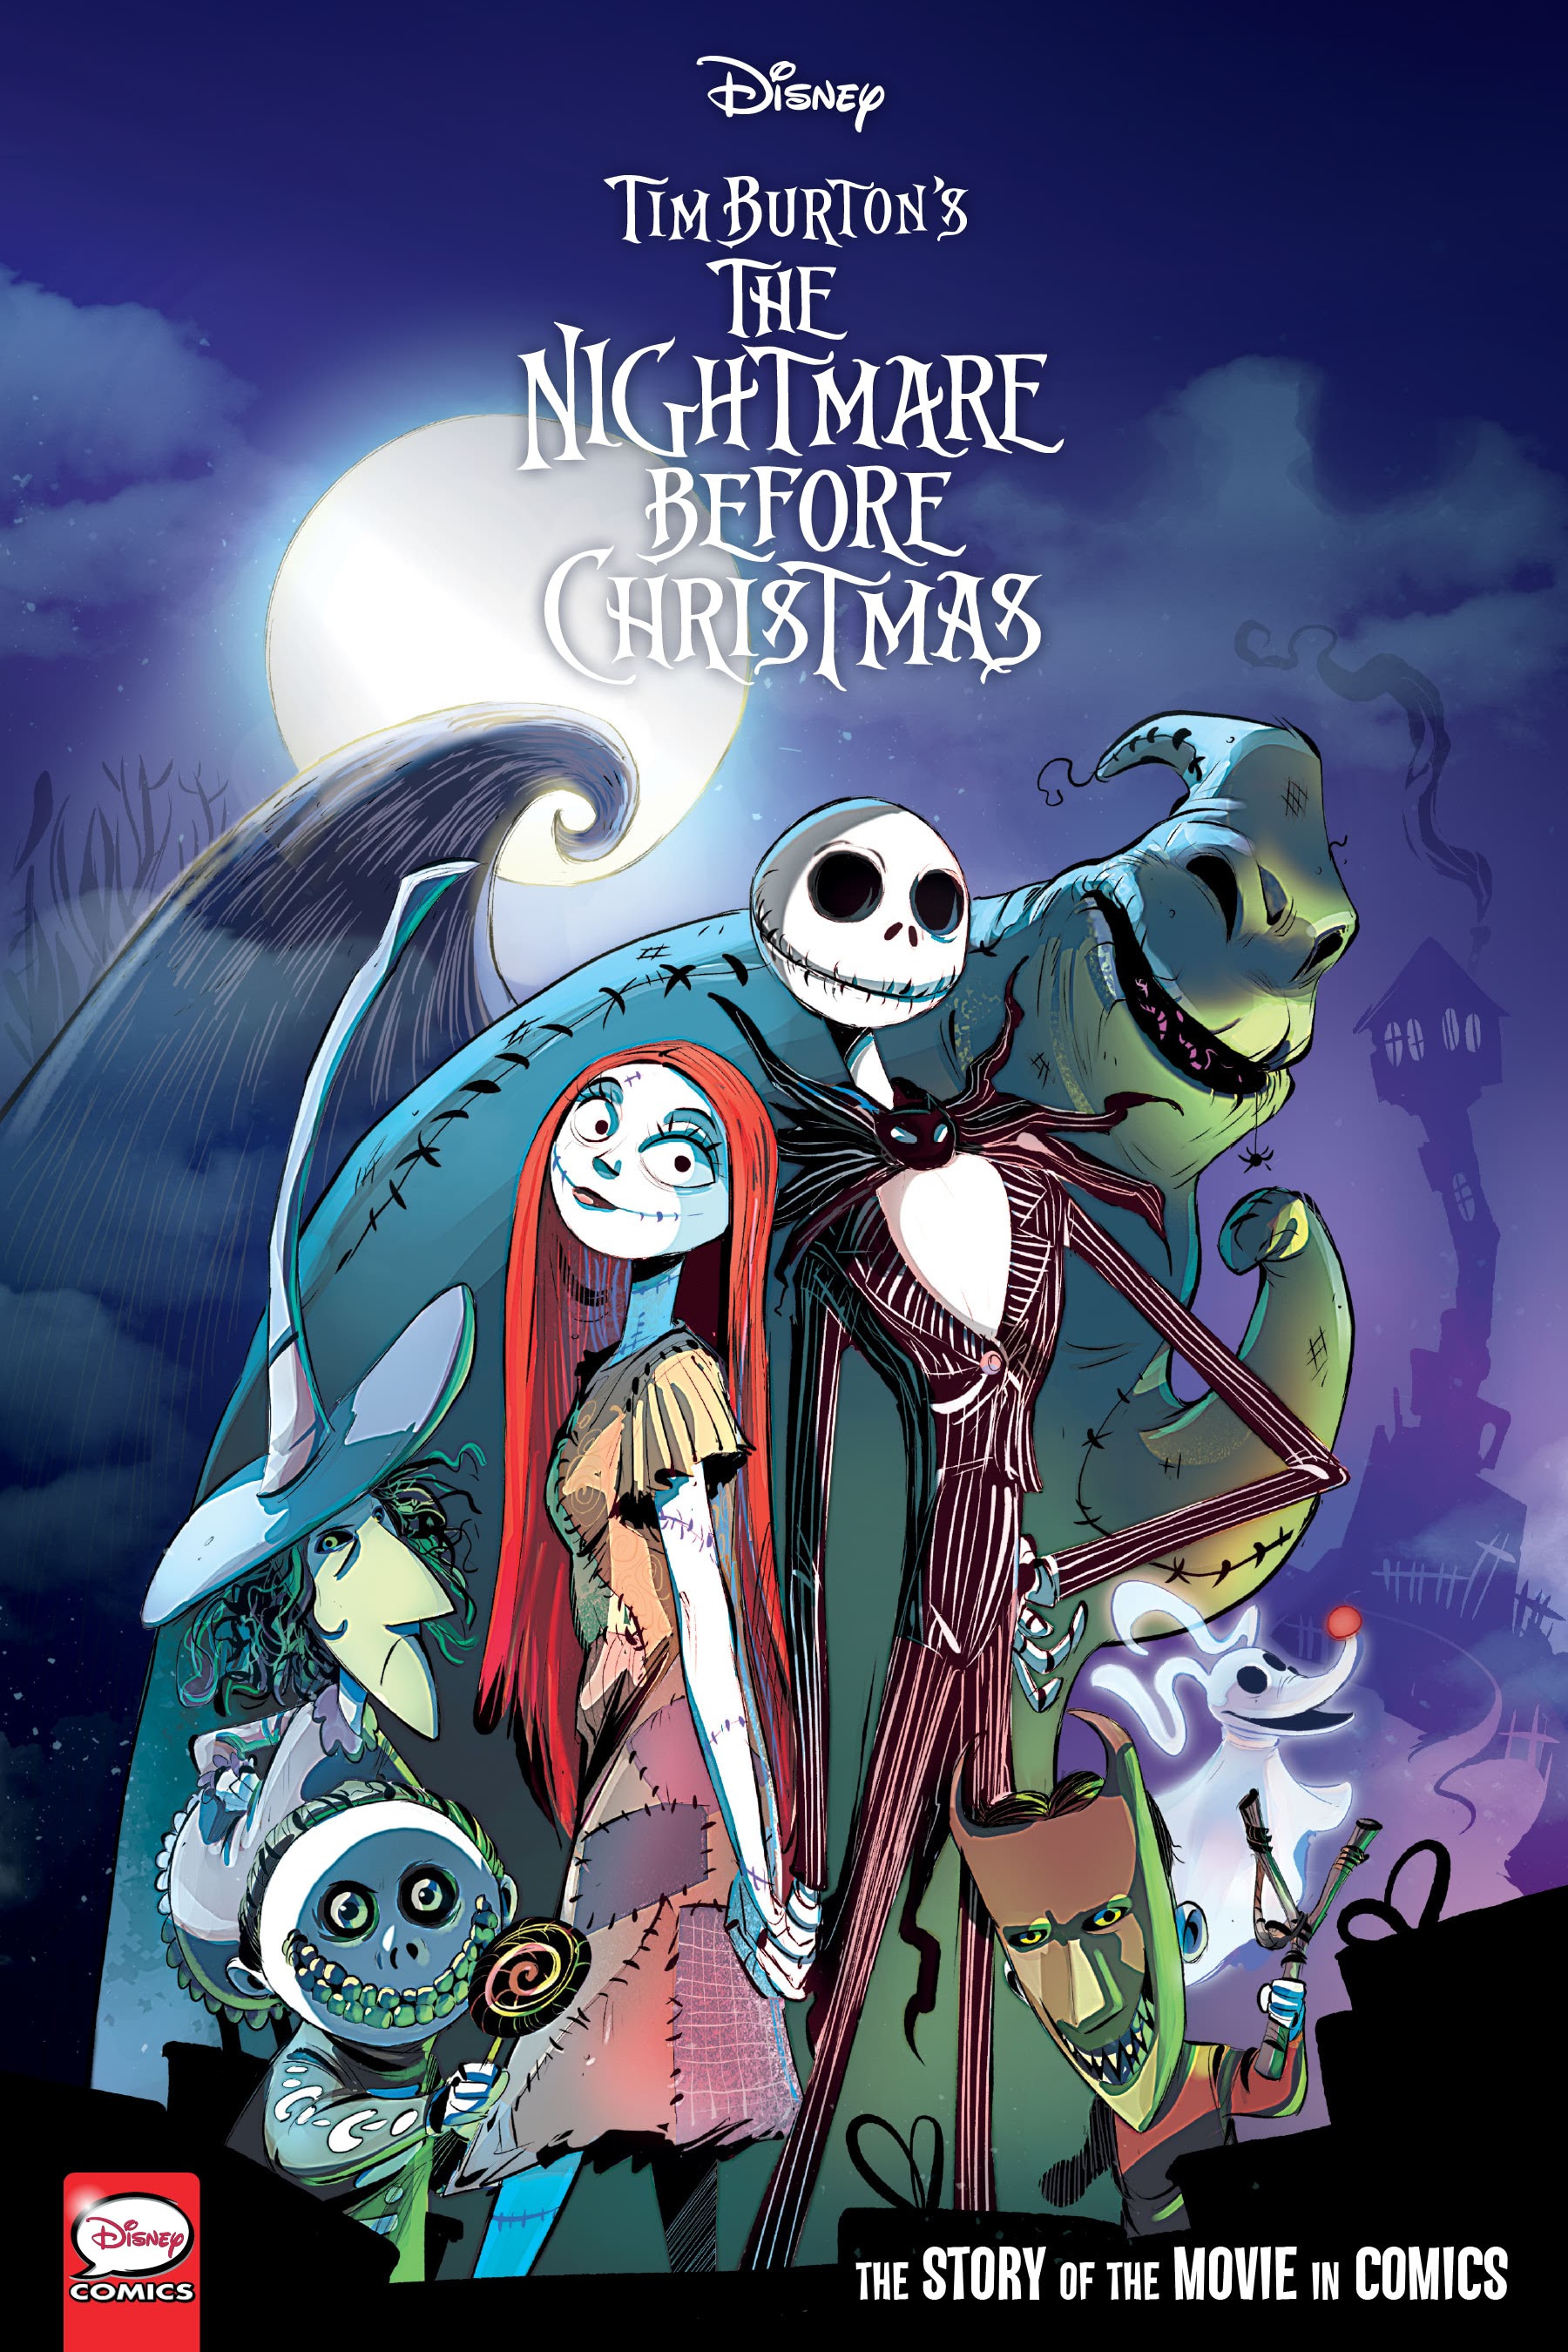 Jugle Book Porn Disney Pregnant - Disney The Nightmare Before Christmas The Story Of The Movie In Comics Full  | Read Disney The Nightmare Before Christmas The Story Of The Movie In  Comics Full comic online in high